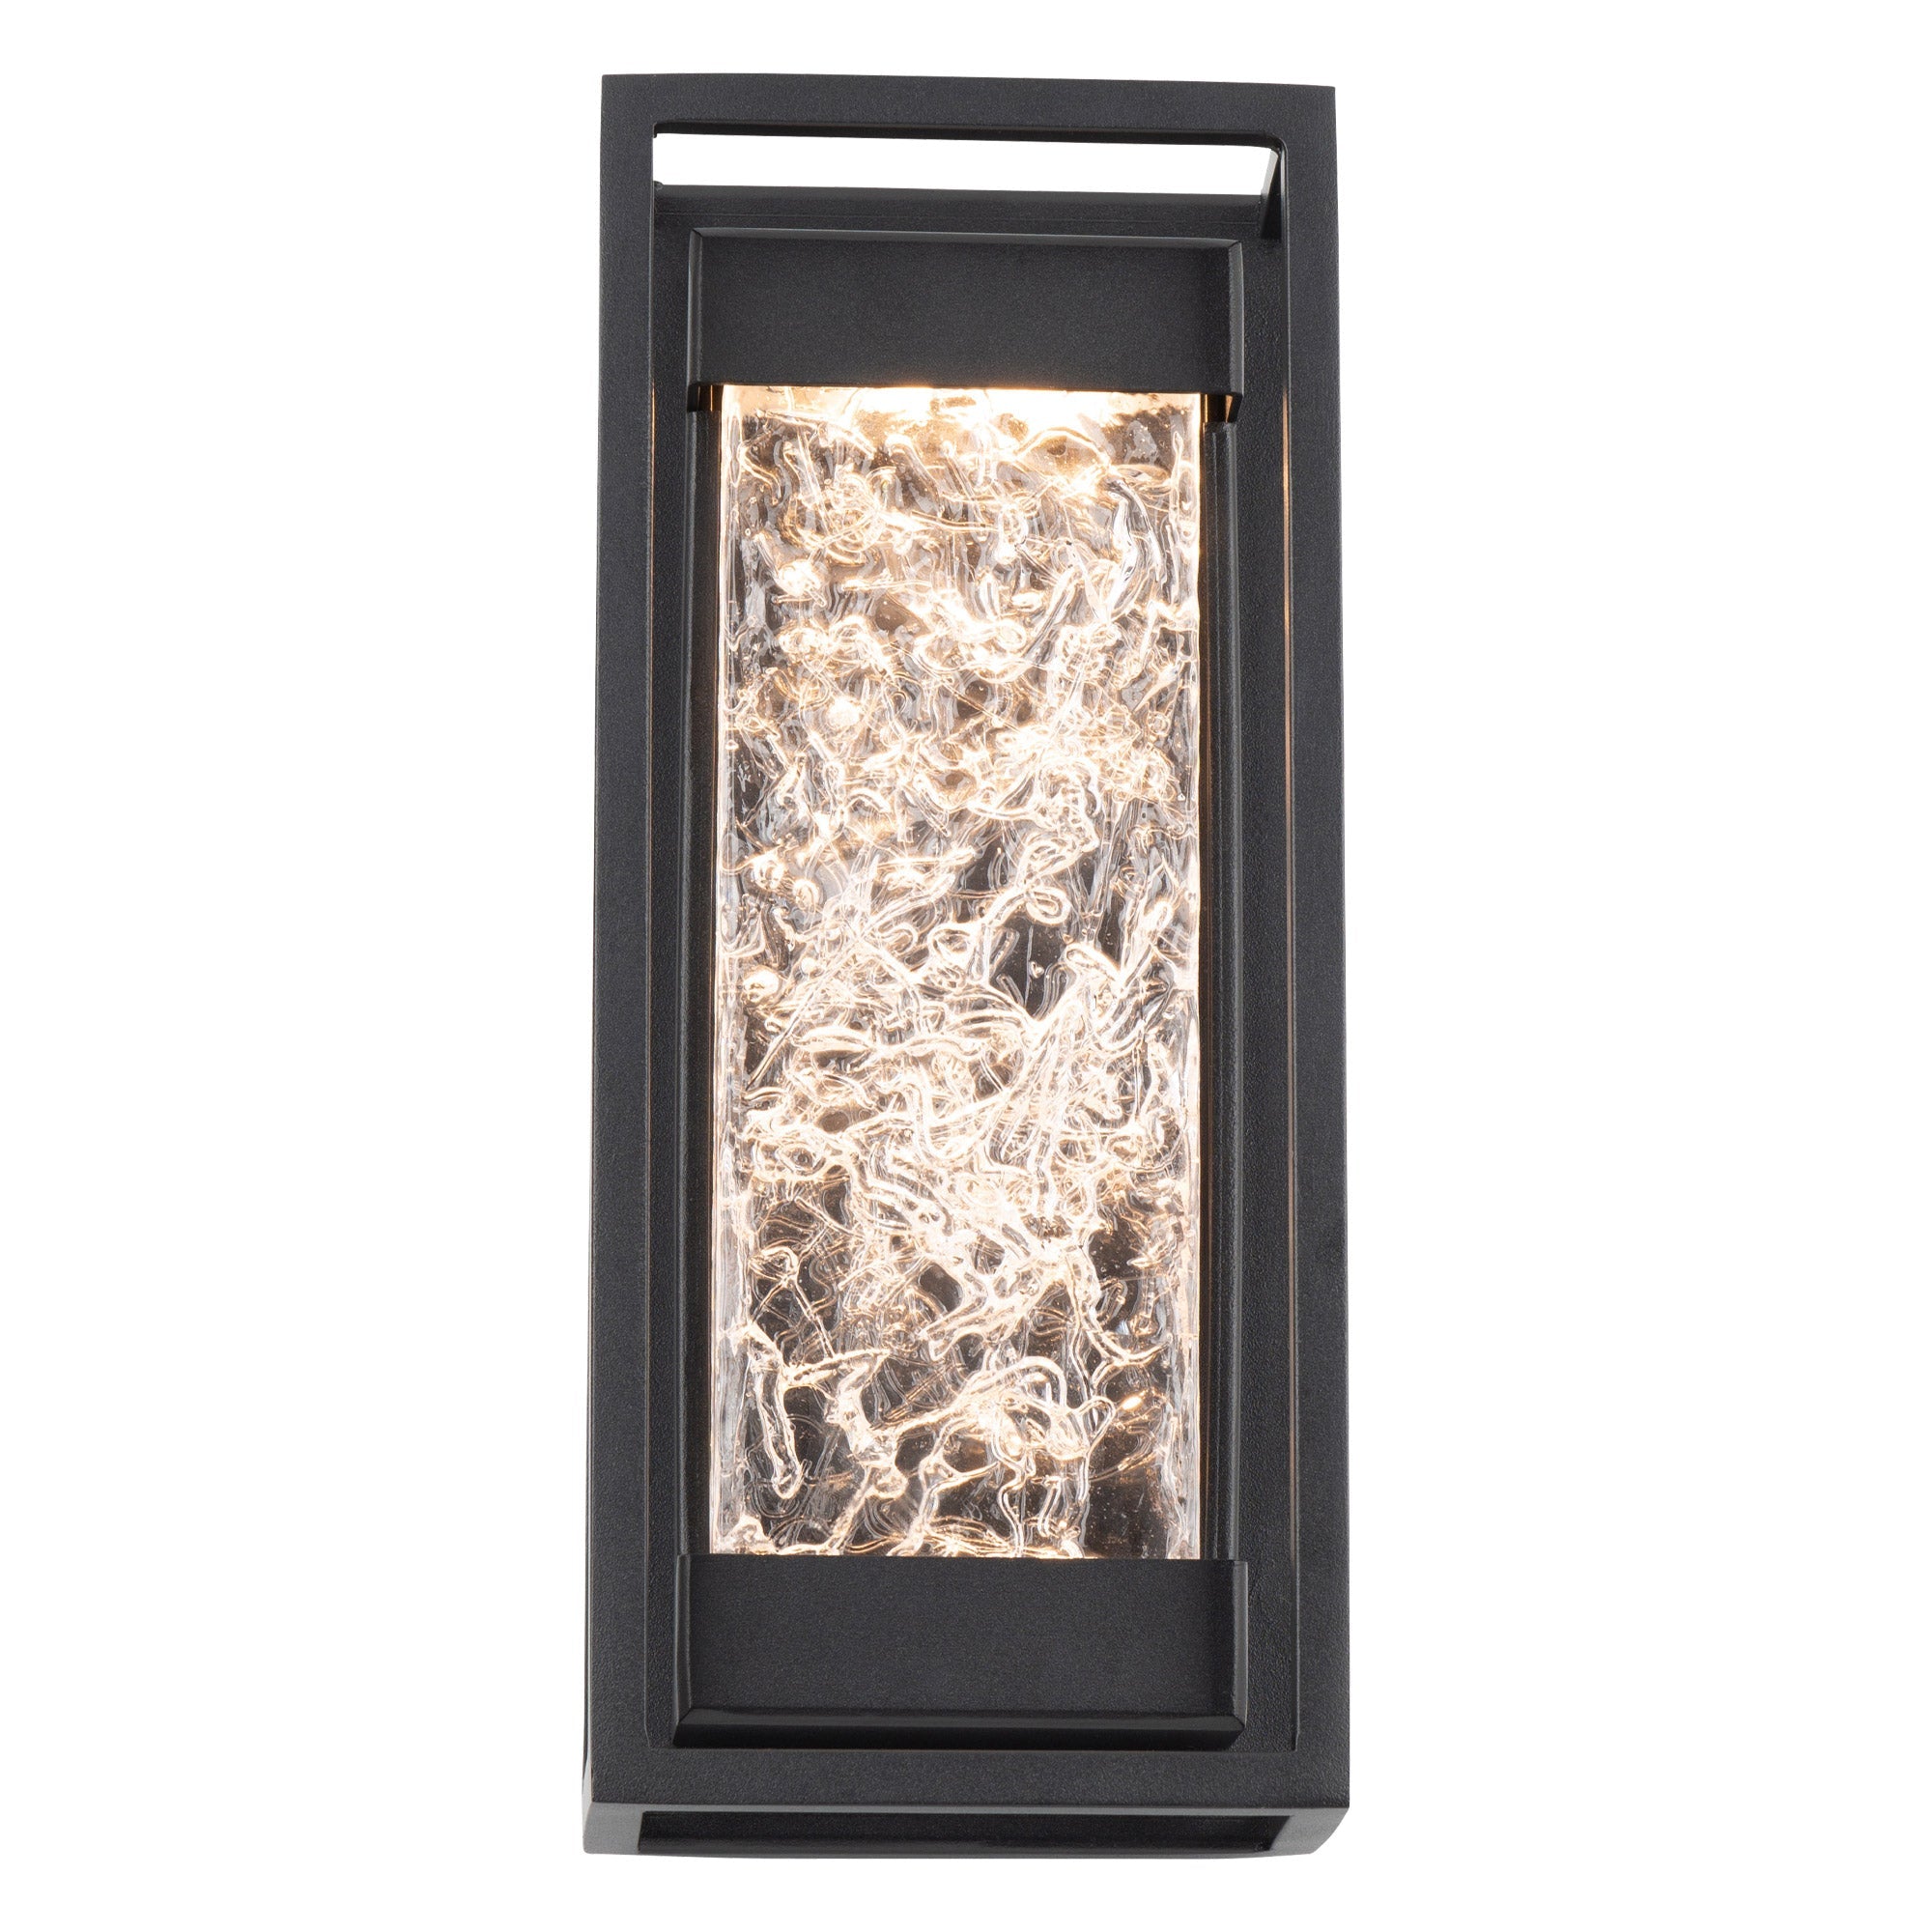 Elyse 12" LED Indoor/Outdoor Wall Light